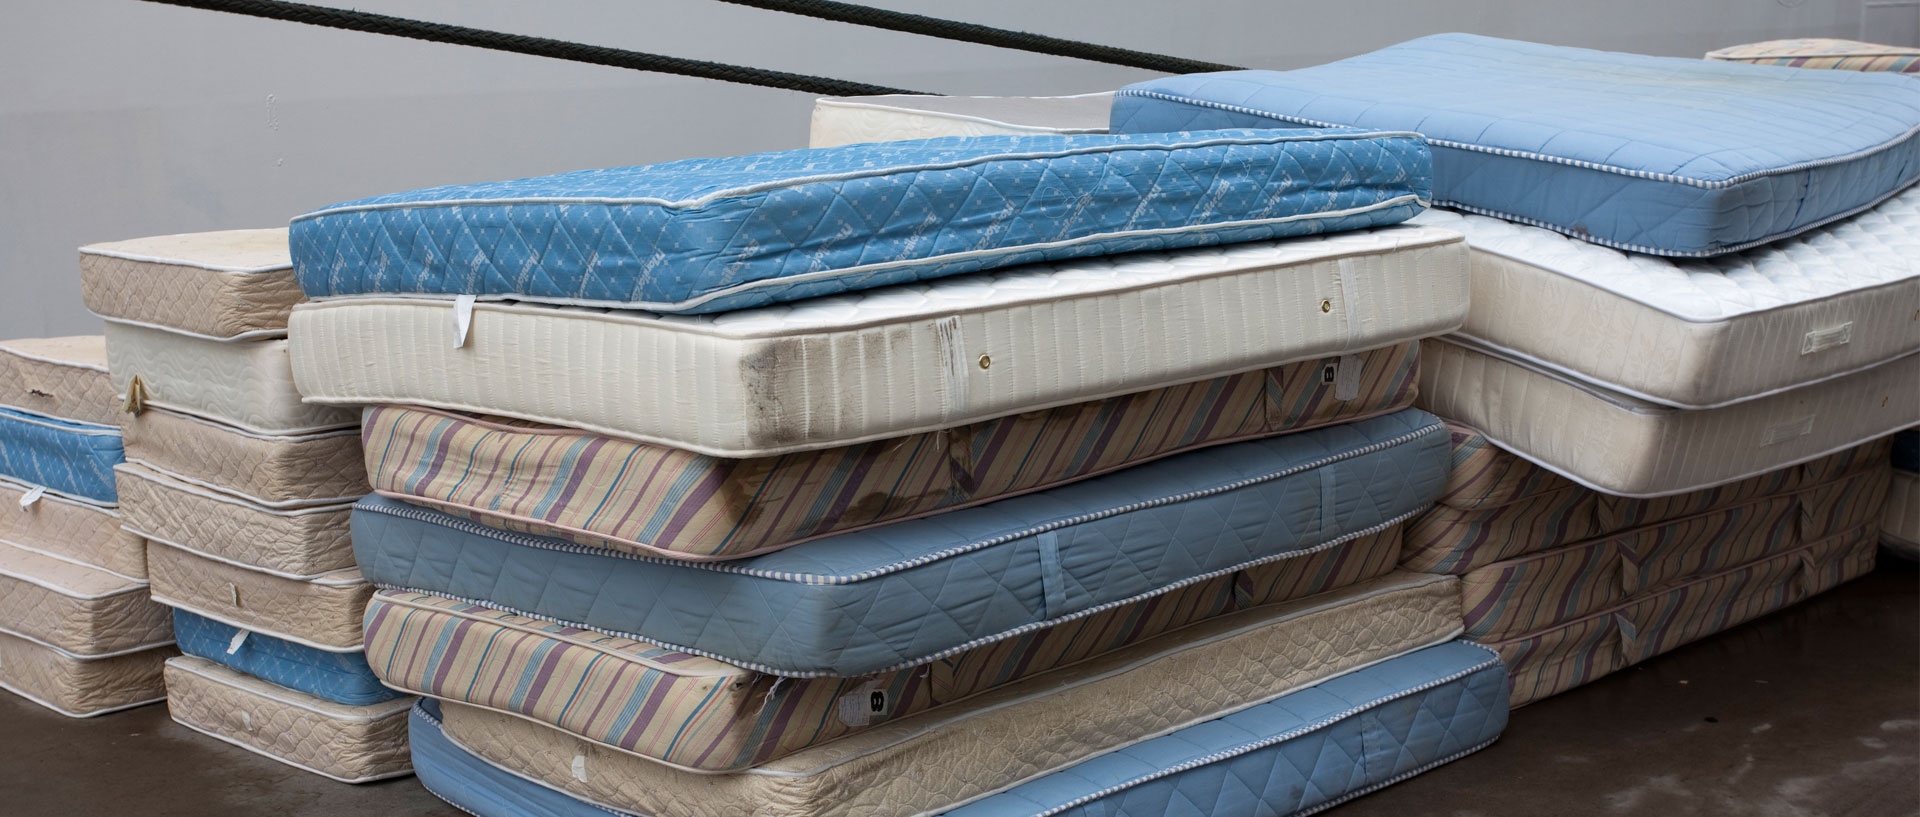 does sleep country sell used mattresses